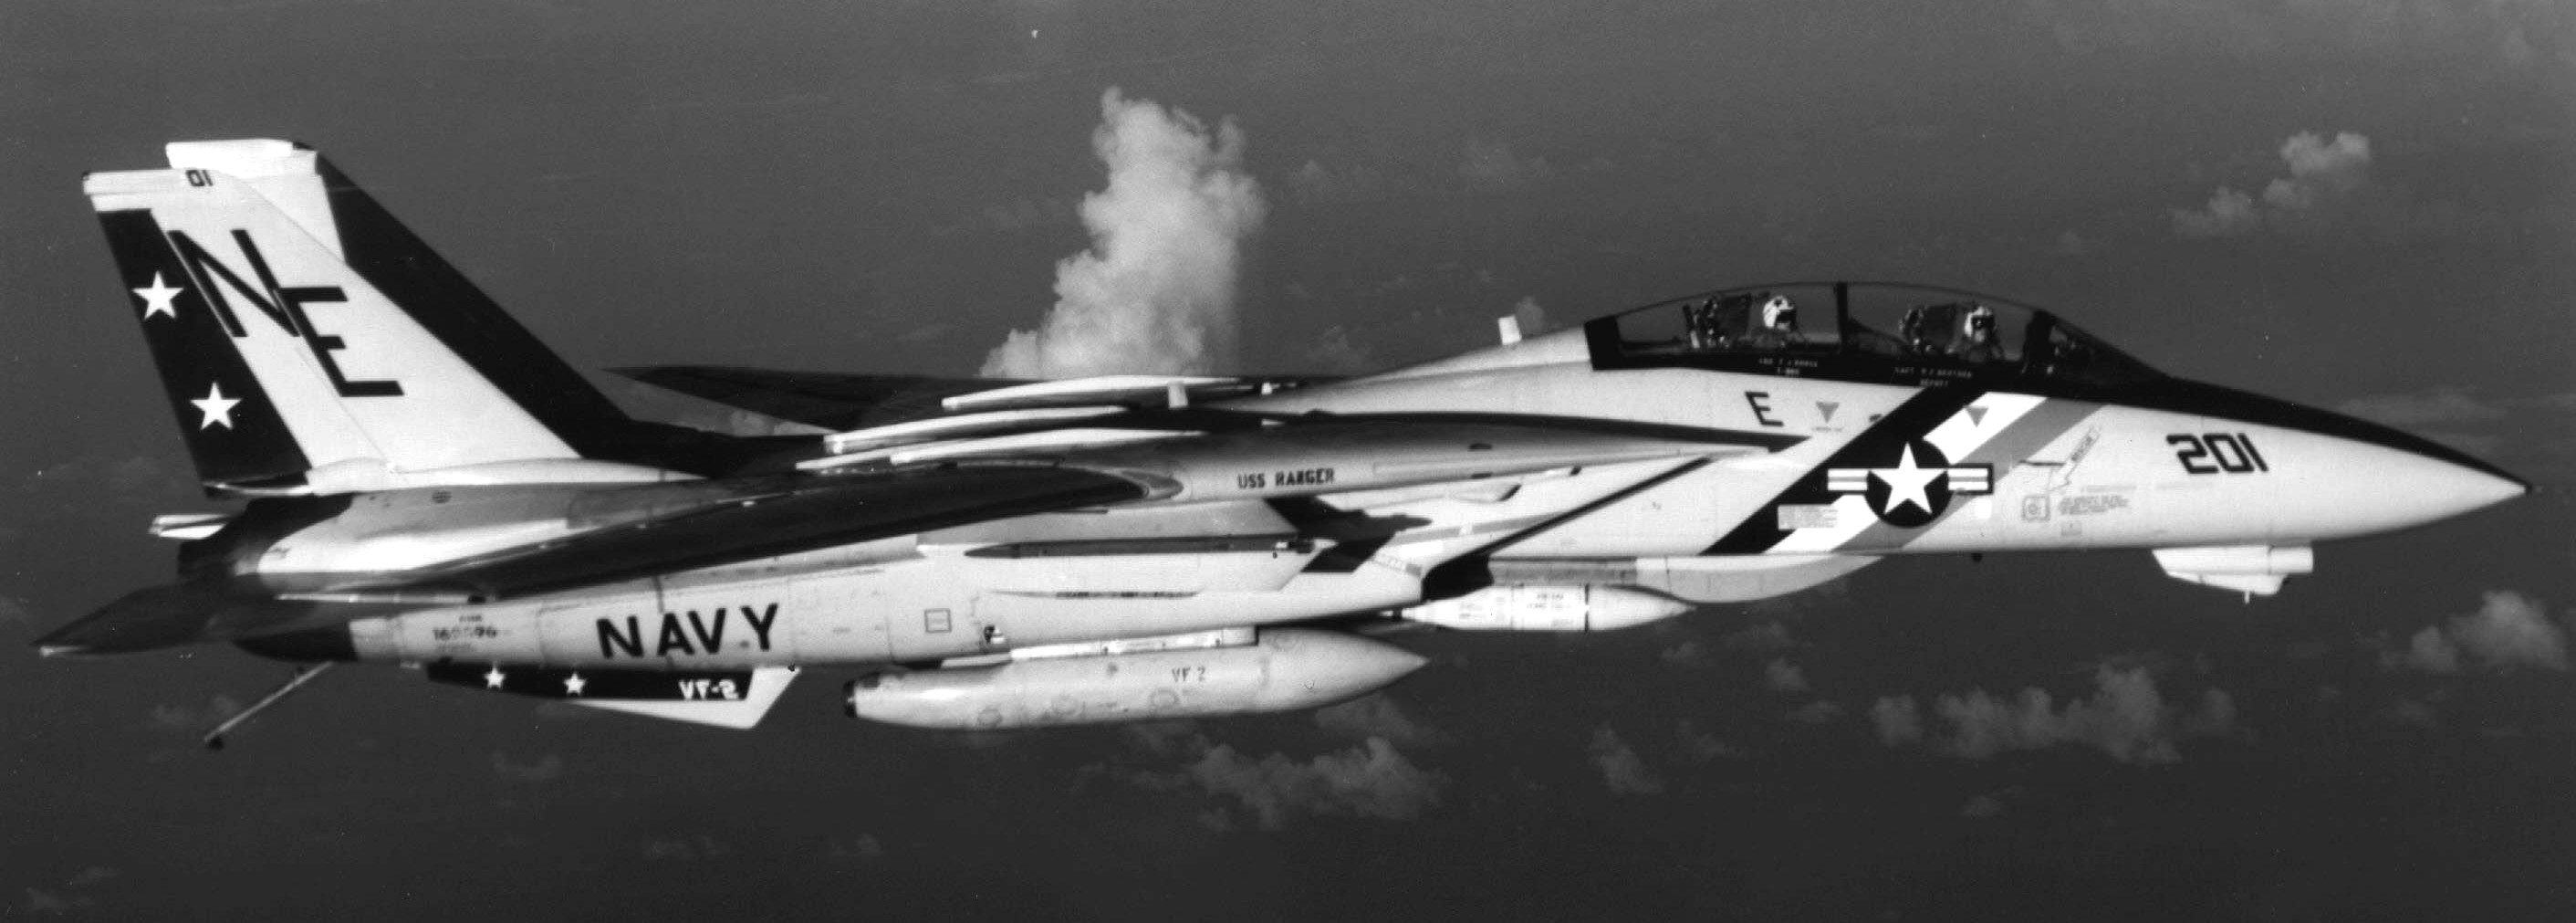 vf-2 bounty hunters fighter squadron fitron f-14a tomcat carrier air wing cvw-2 uss ranger cv-61 53